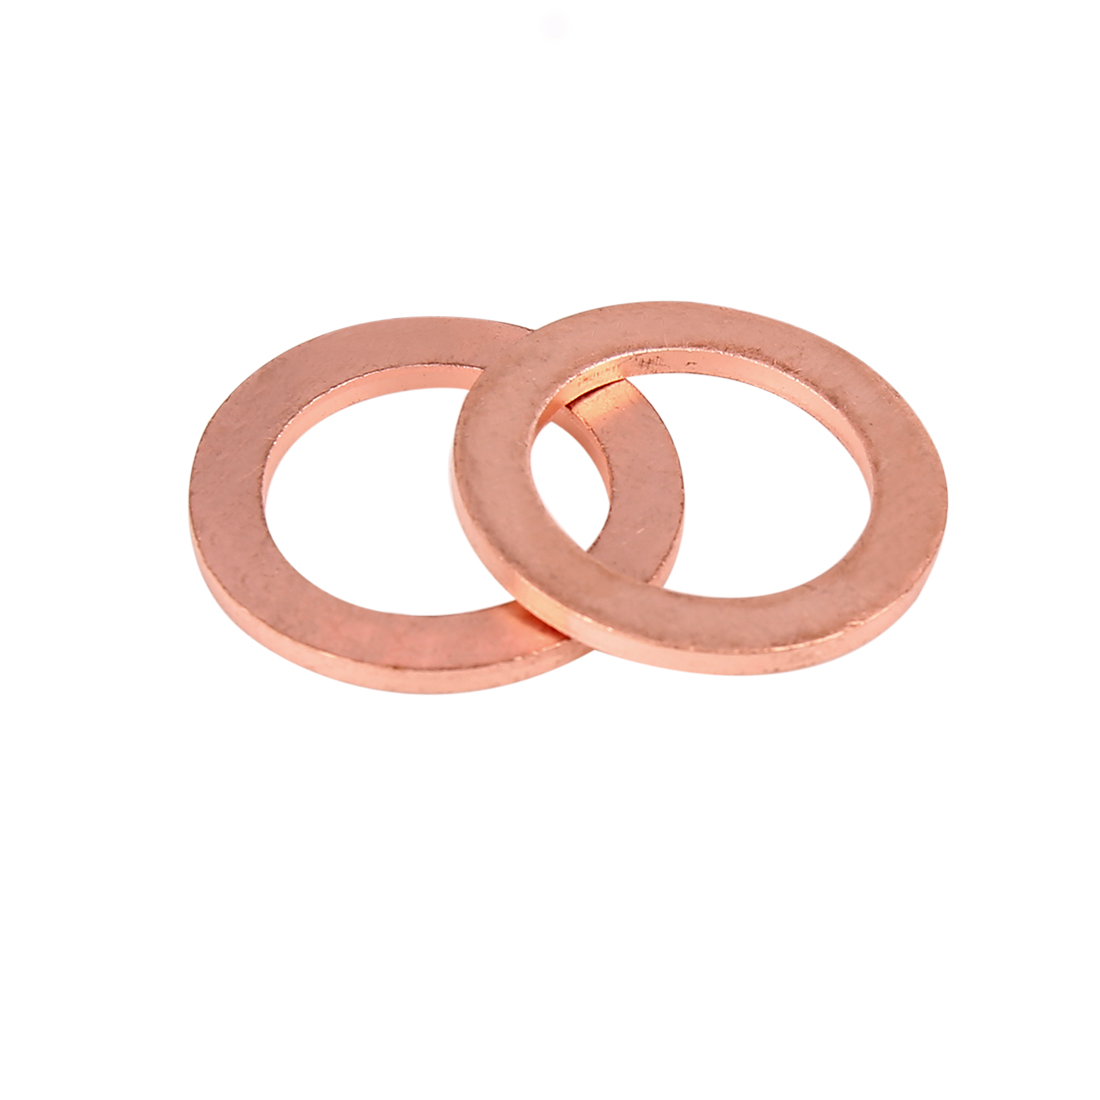 Unique Bargains 10pcs Copper Washer Flat Sealing Gasket Ring Spacer for Car 14 x 20 x 1.5mm